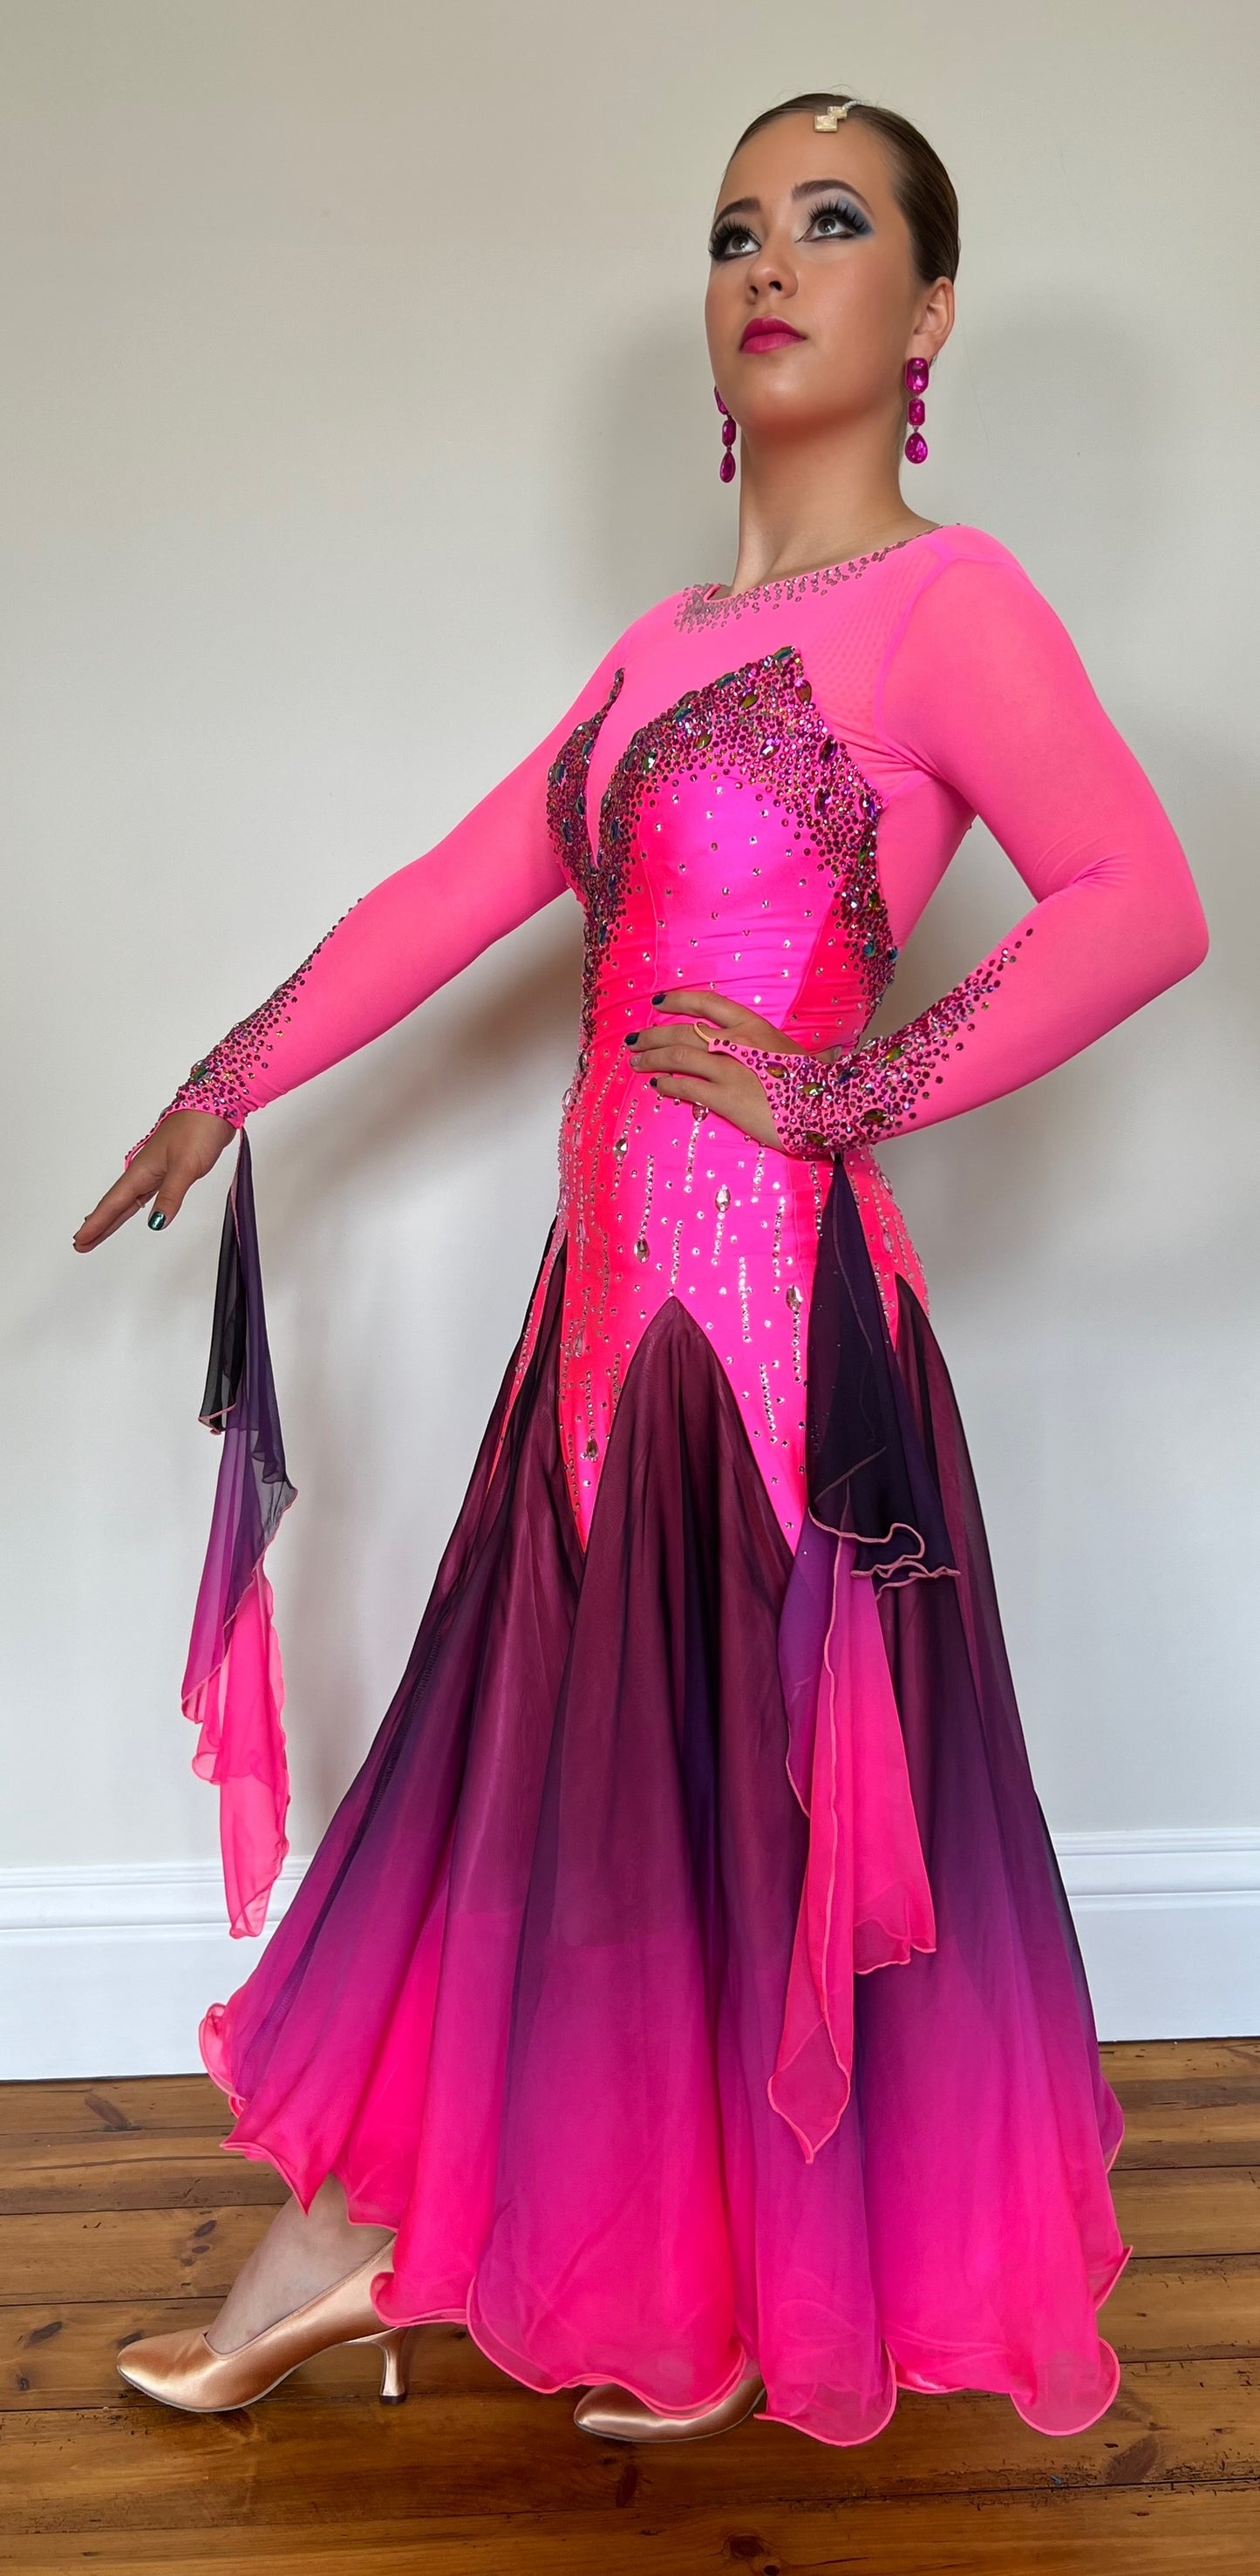 129 Electric Pink & Black Ombre Ballroom Dress. Decorated in Fuchsia & AB stones. Ombré floats from the wrist